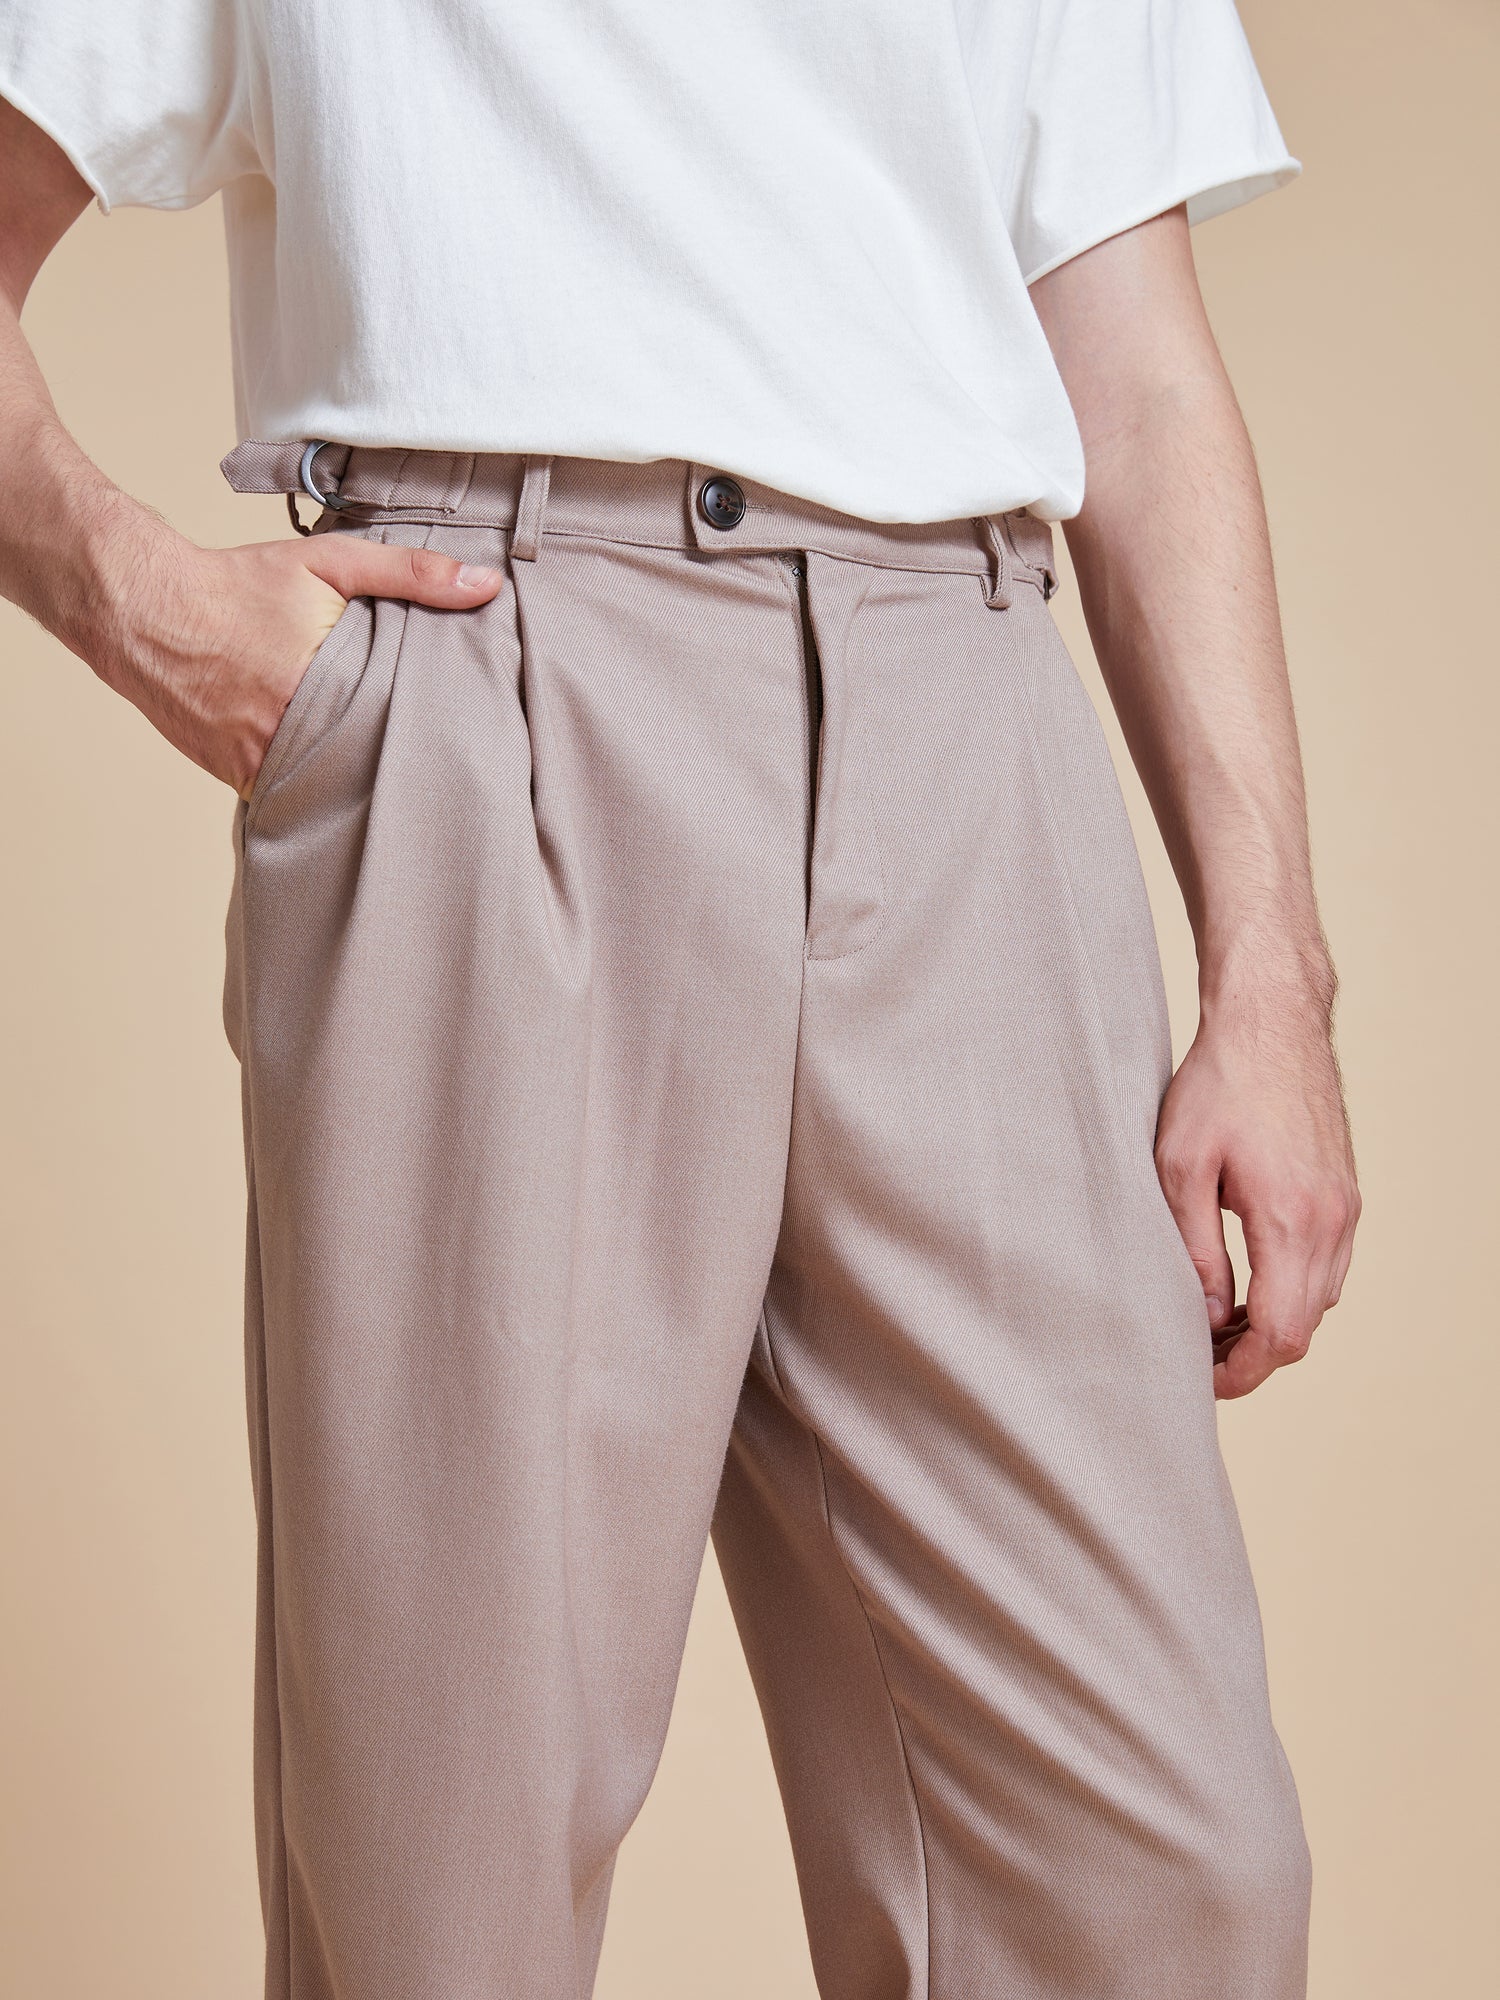 A man wearing a white t-shirt and Found pleated trousers.